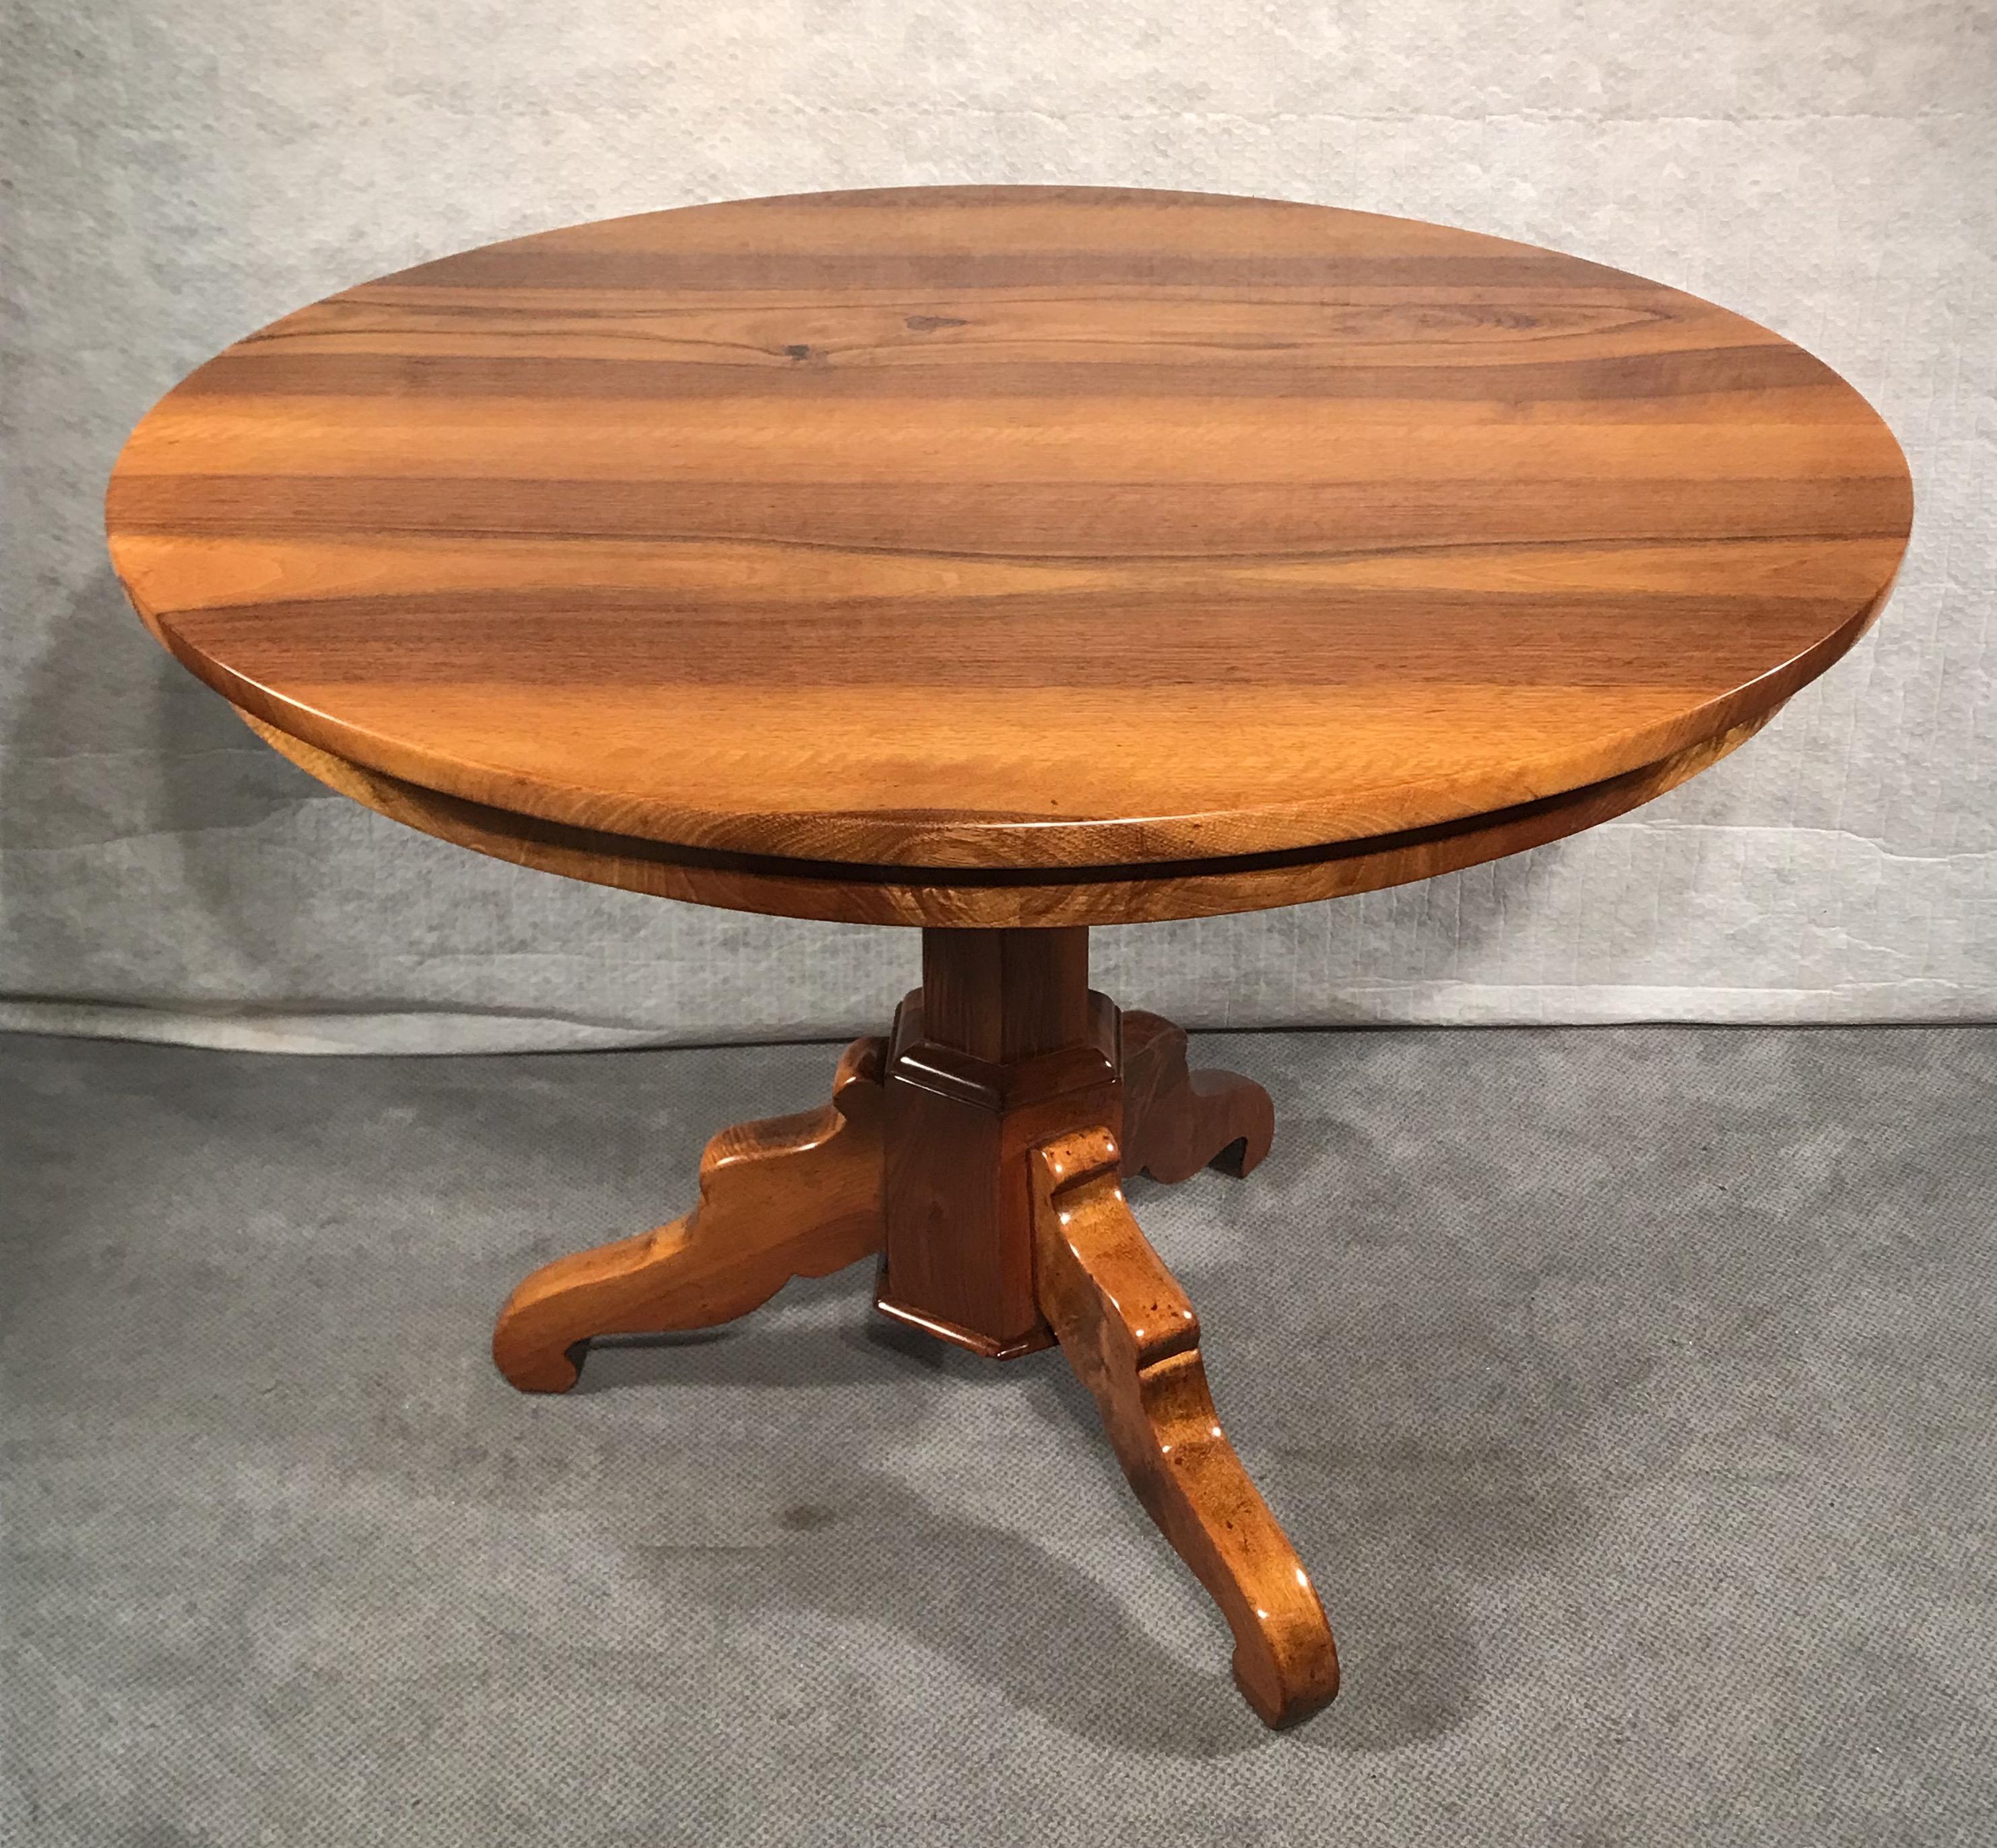 This original Biedermeier table dates back to around 1830. It comes from Southern Germany. The table stands on a hexagonal column which rest on a trefoil base. 
Top and base have a pretty walnut veneer. The table comes refinished with a shellac